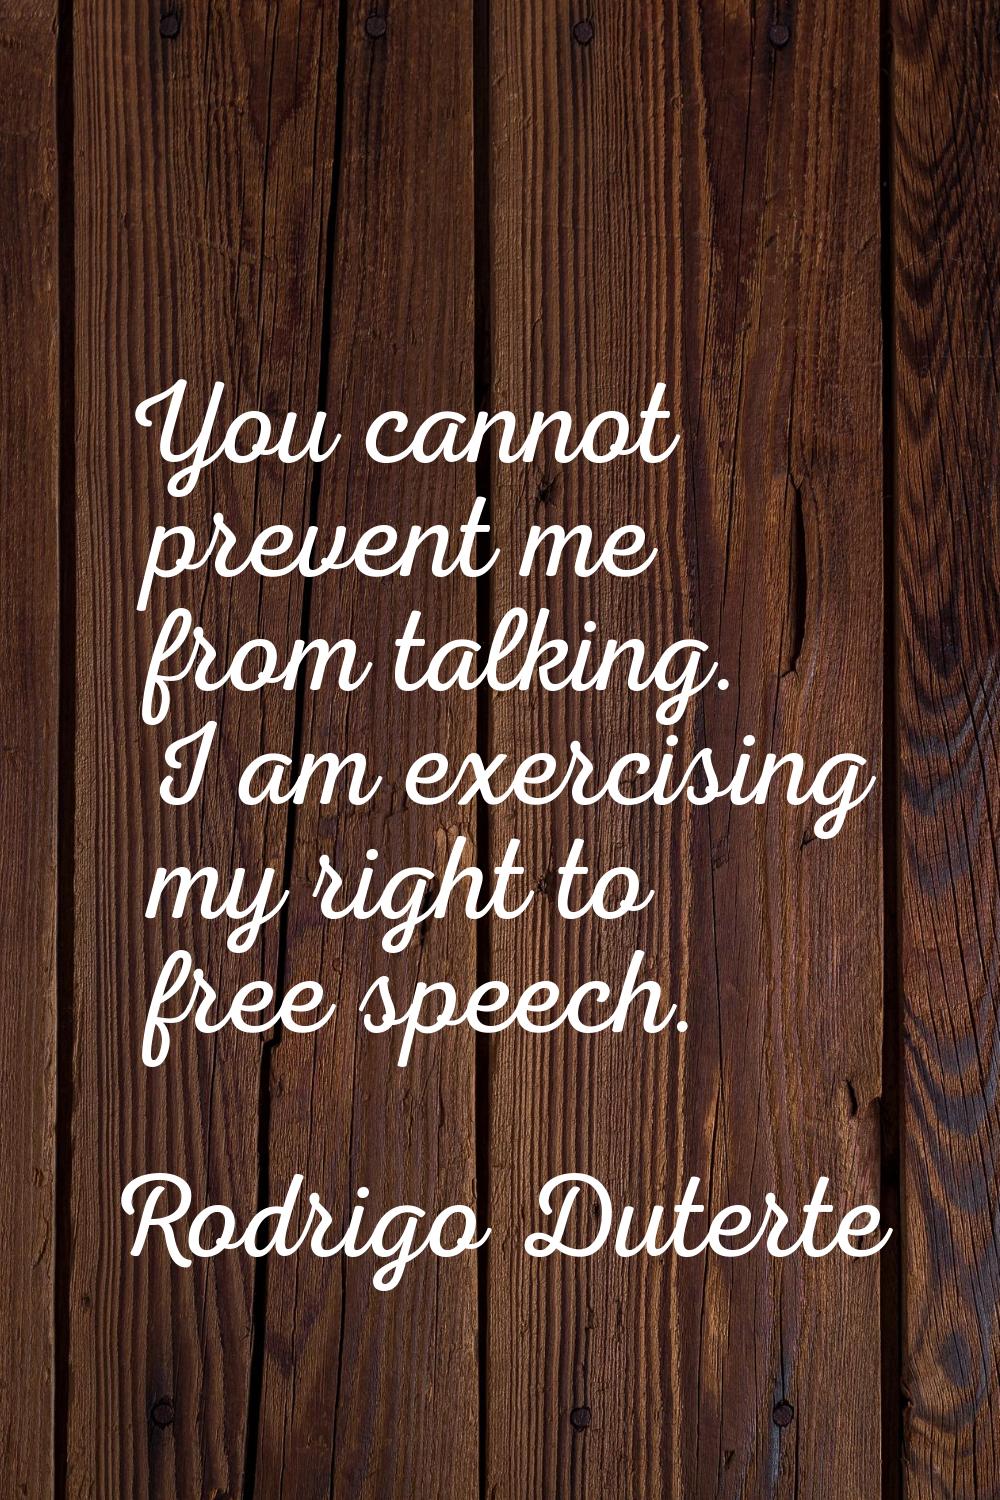 You cannot prevent me from talking. I am exercising my right to free speech.